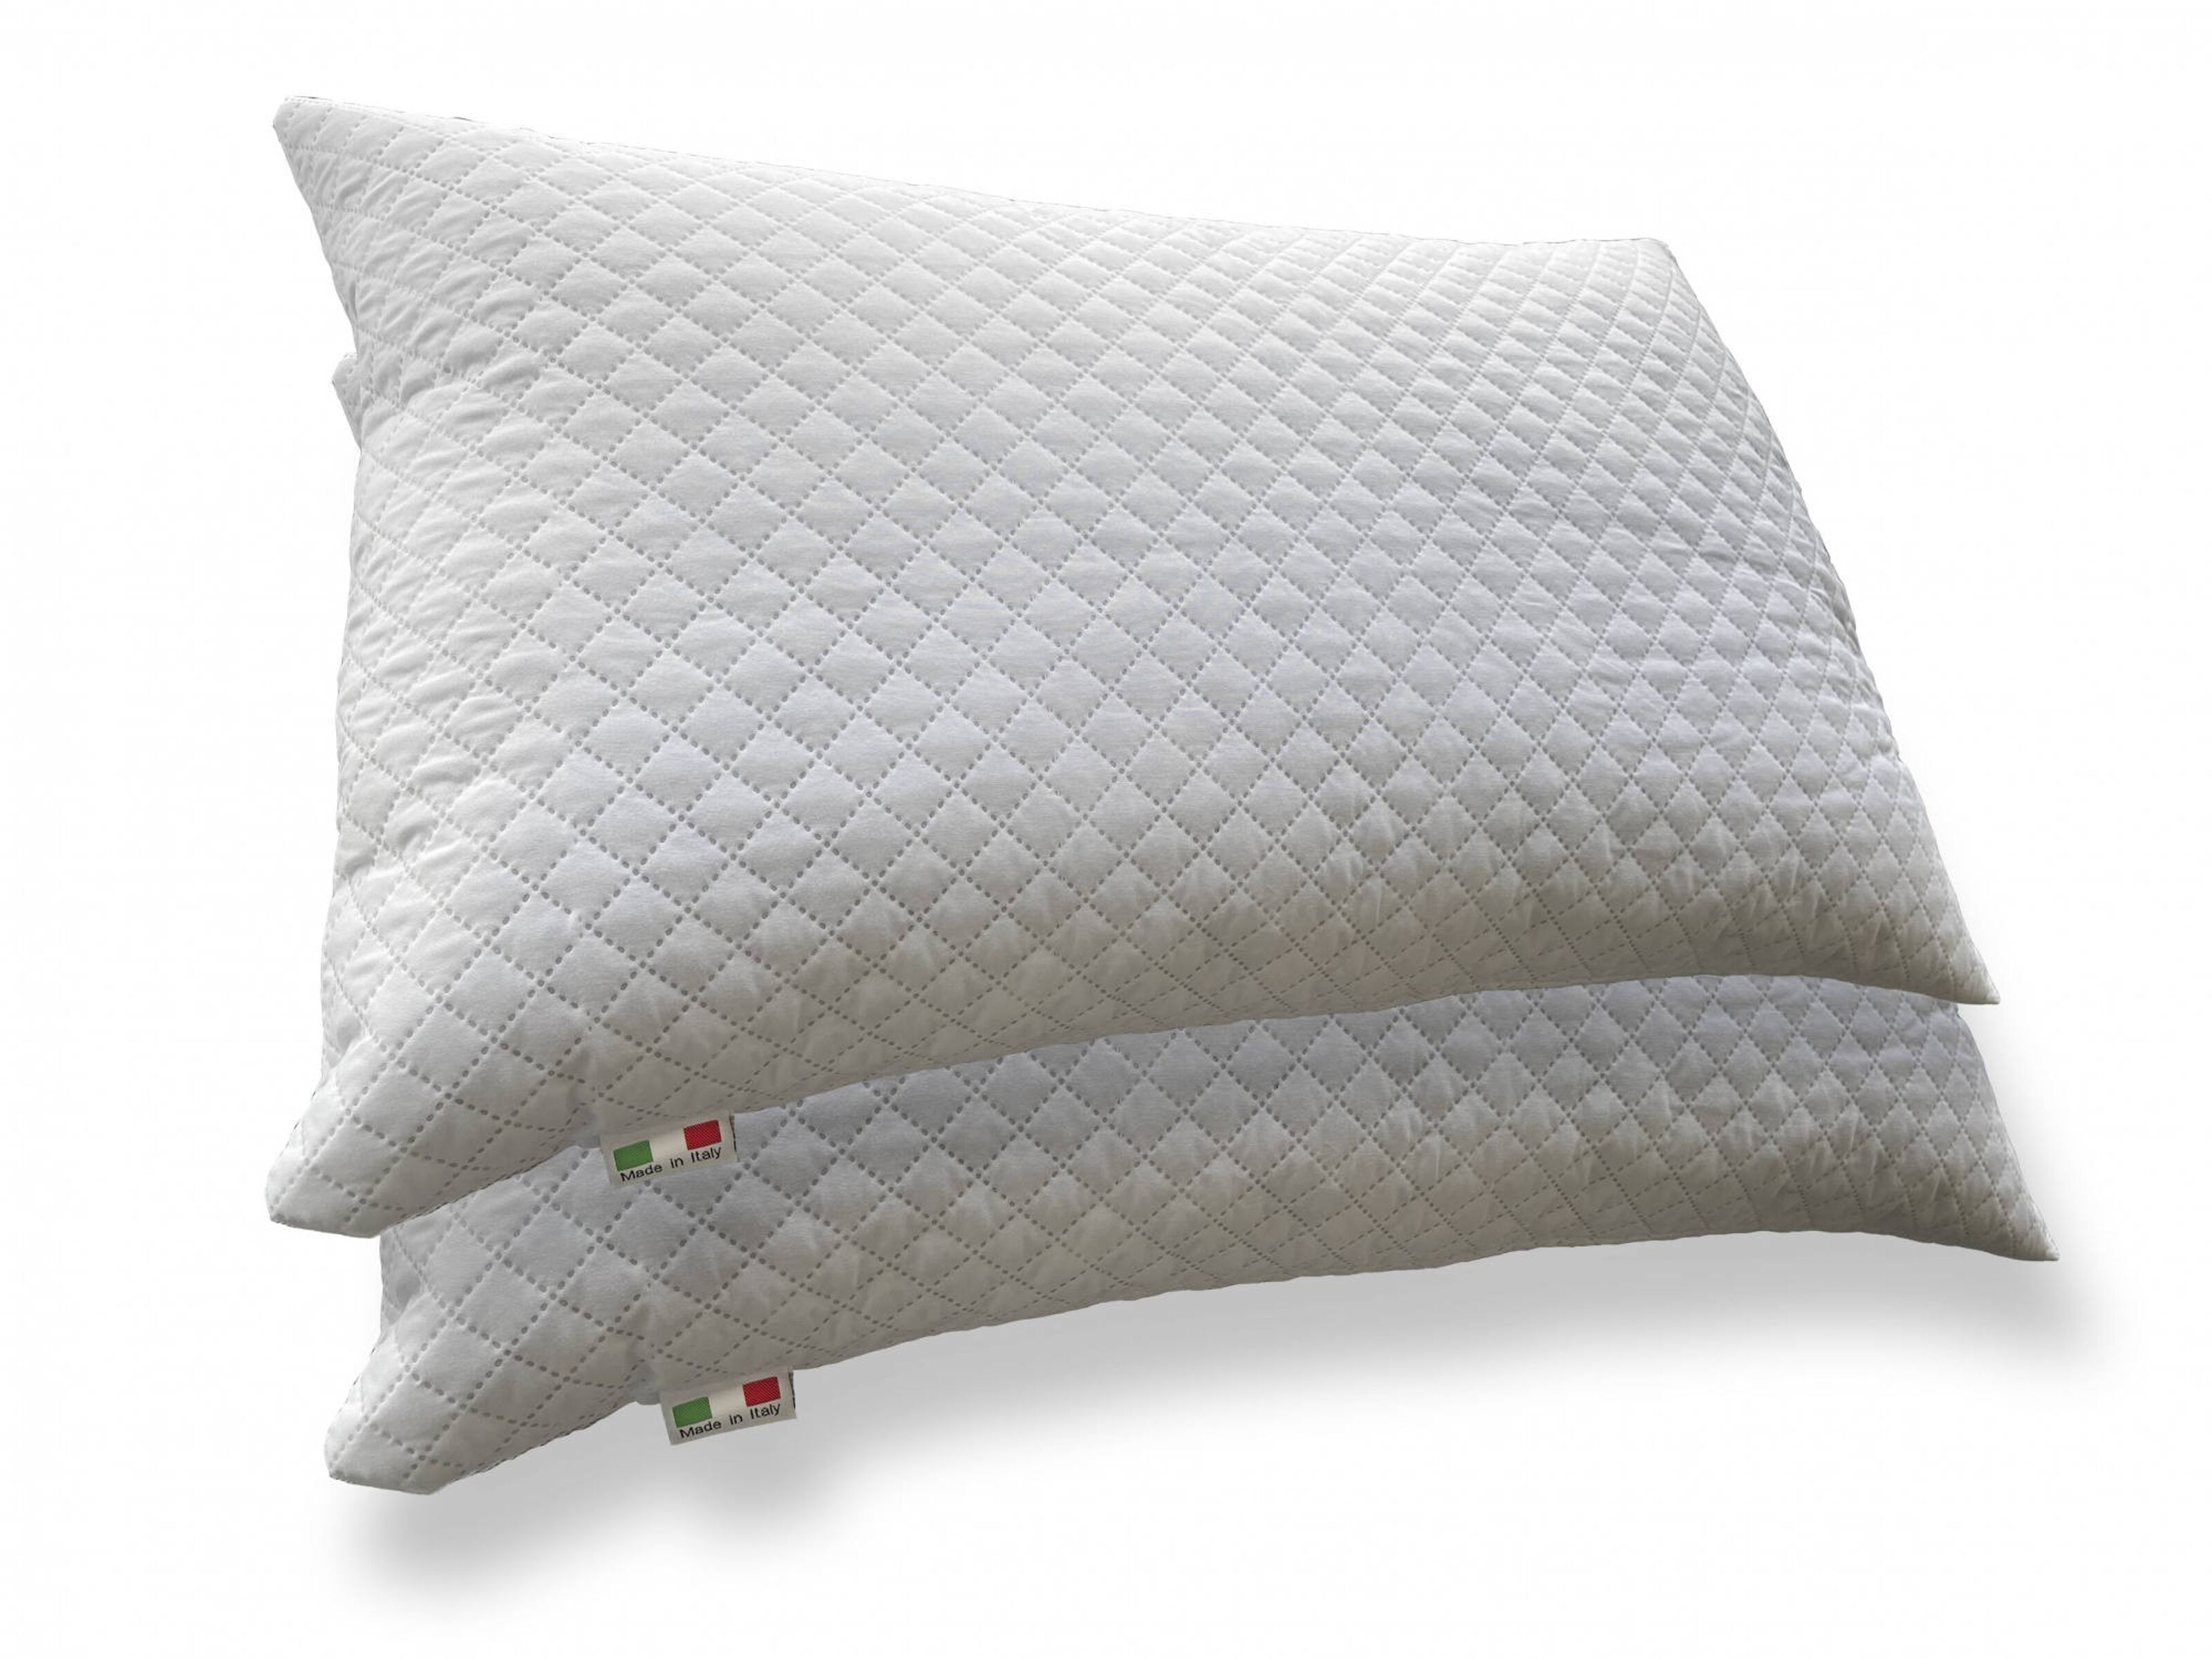 Buy wholesale Dmora Talamo Italia pair of pillows for bed, 100% Made in  Italy, Pillows in perforated memory foam, Hypoallergenic and Breathable,  73x44xh14 cm